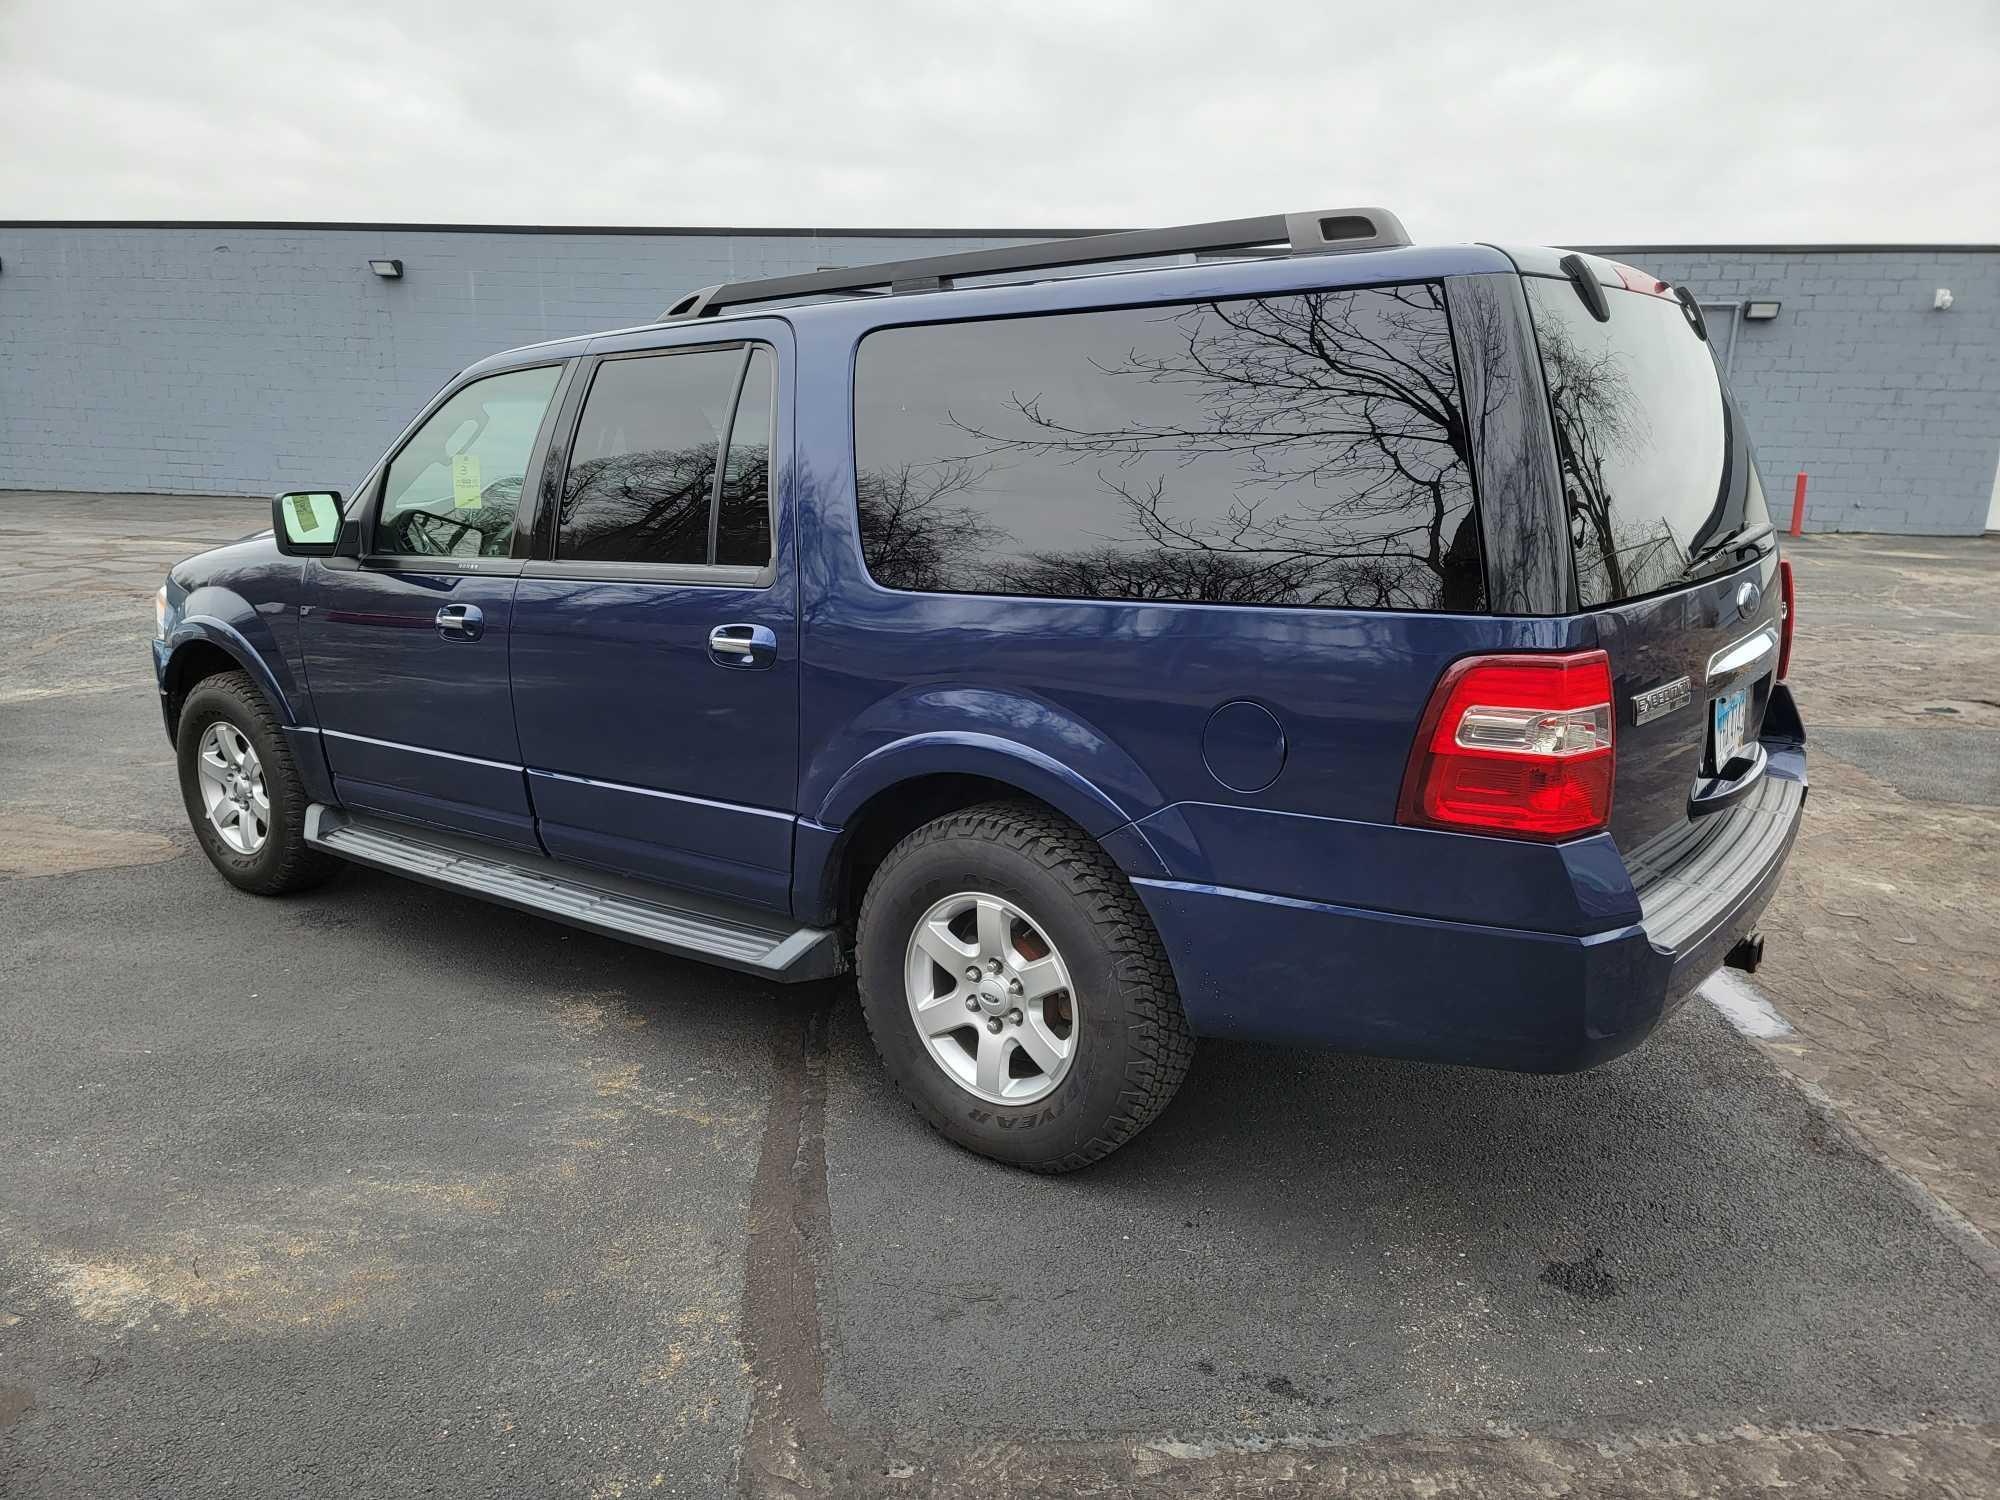 2009 Ford Expedition XLT Extra Long